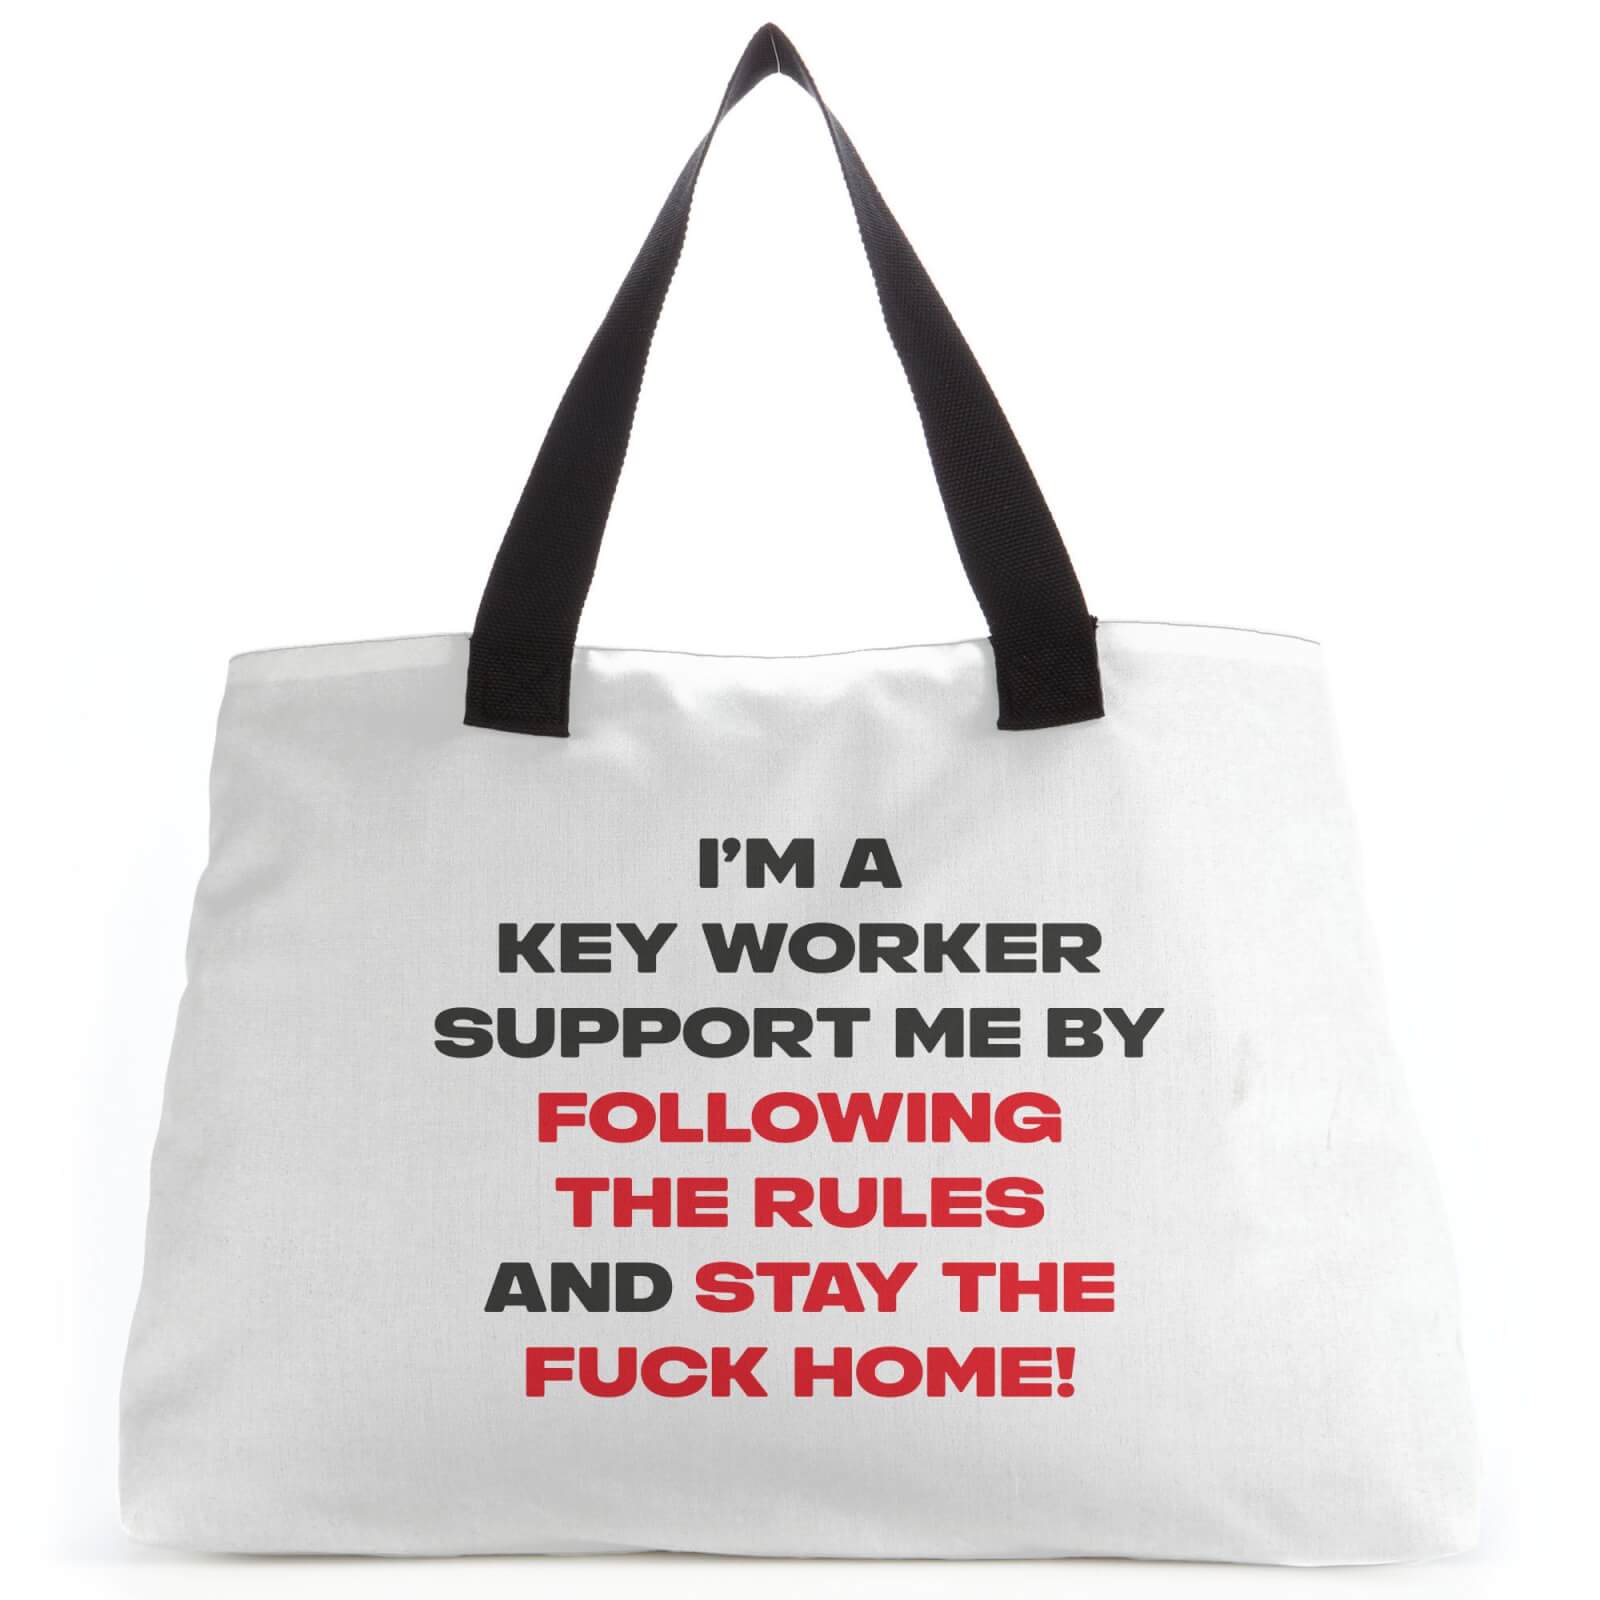 Stay The Fuck Home! Tote Bag